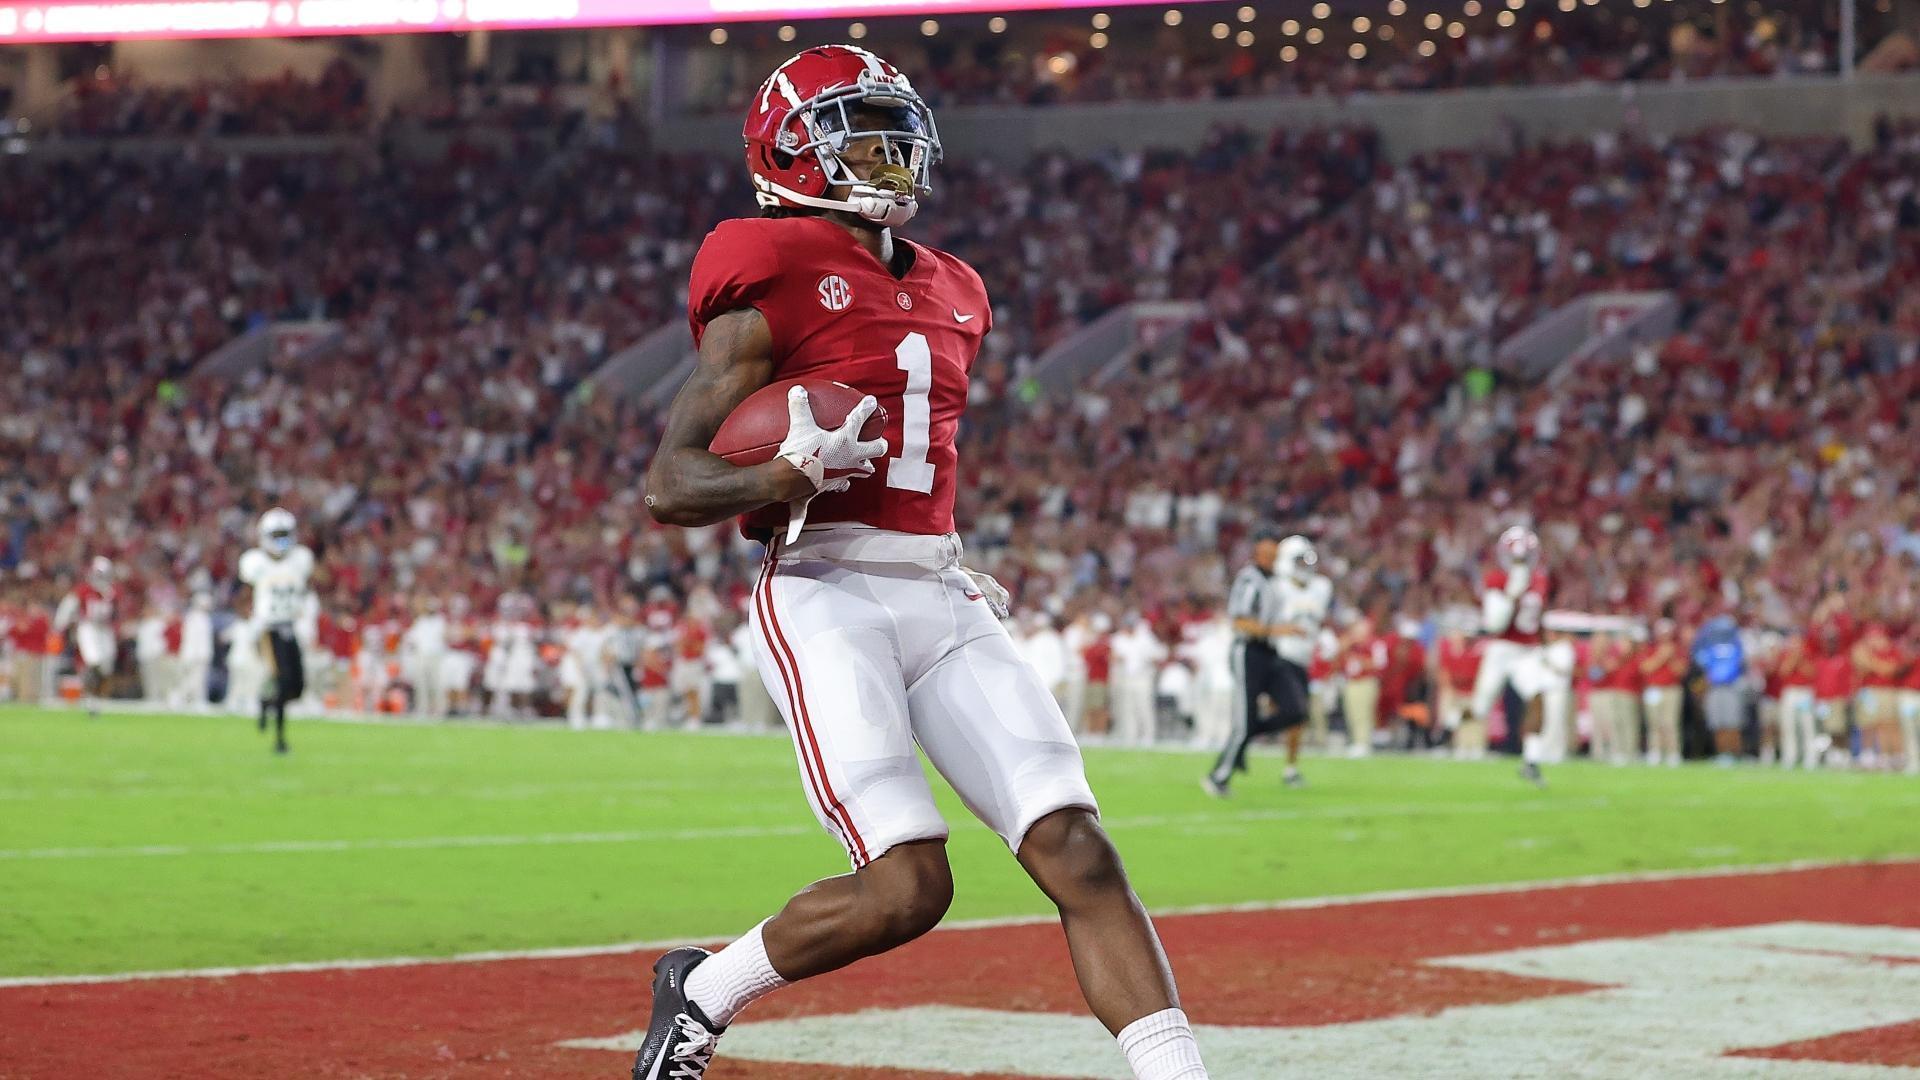 Bama's Jameson Williams makes history with 3 TDs longer than 80 yards